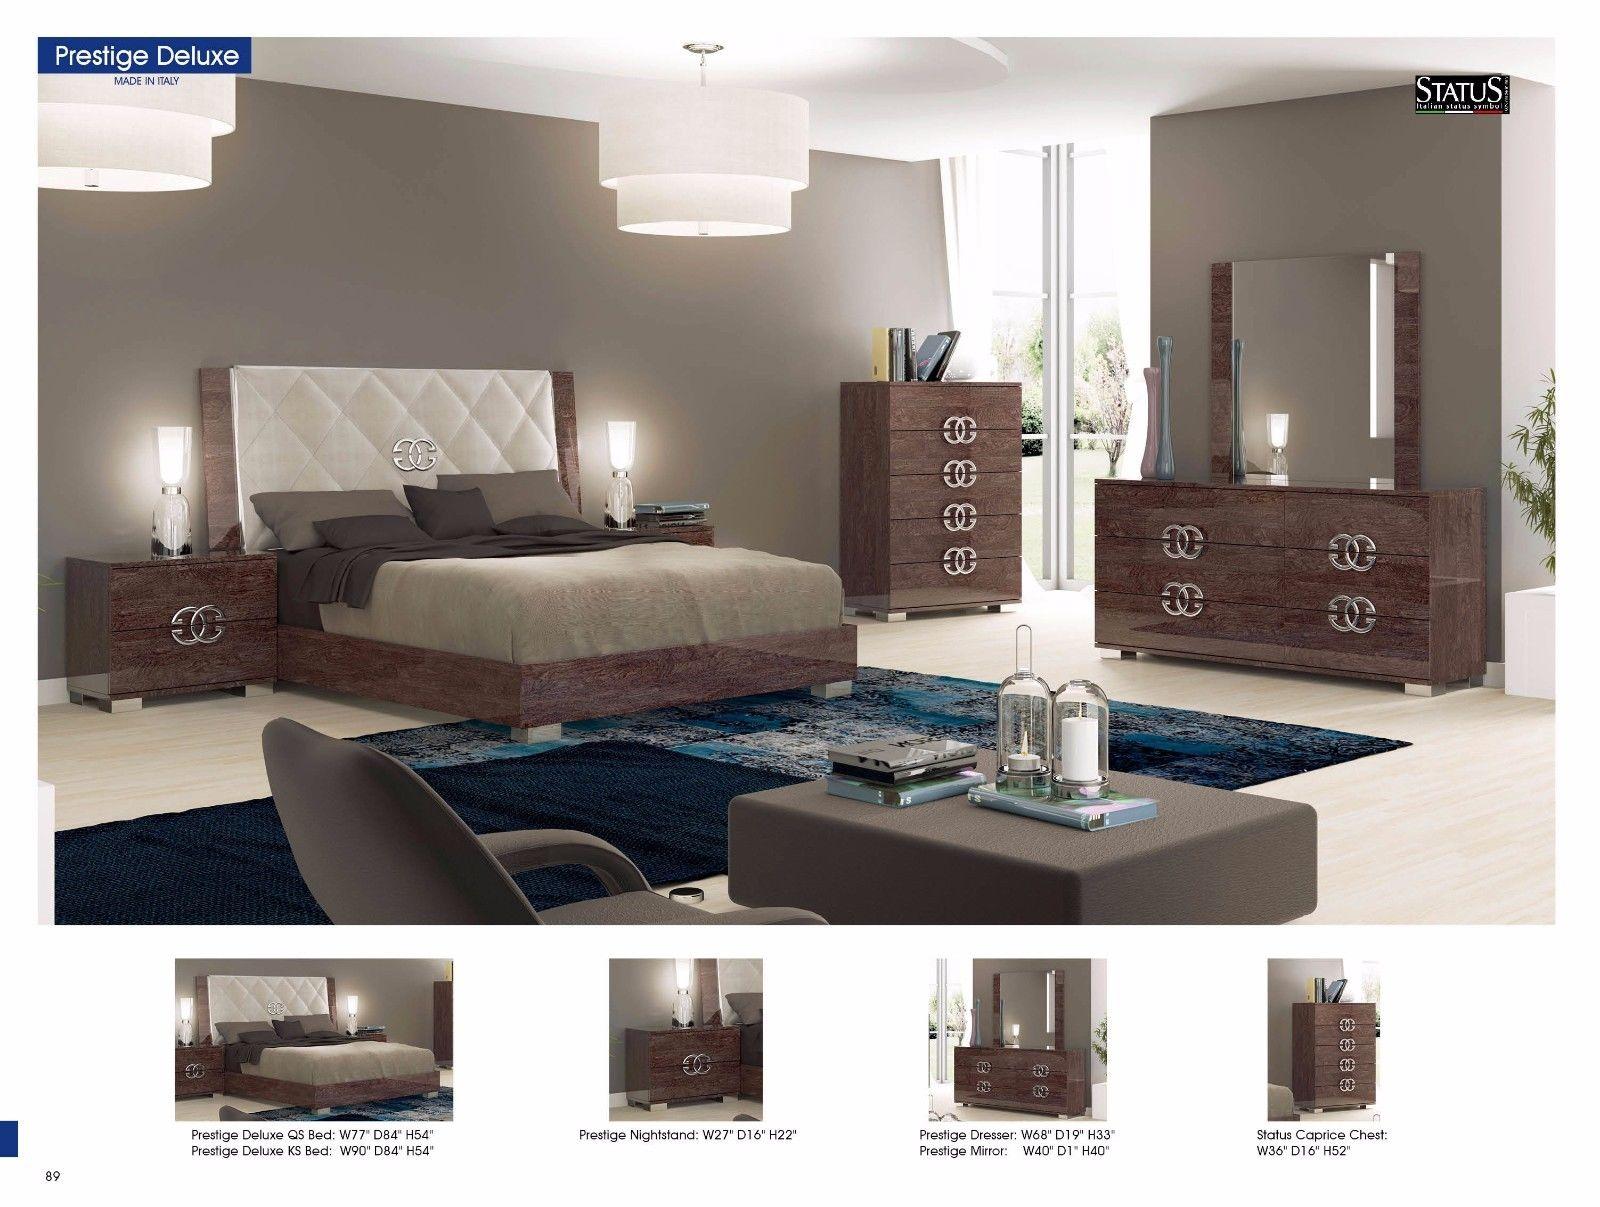 

    
 Order  Glossy Finish Upholstered Headboard Queen Bedroom Set 5Pcs Made in Italy ESF Prestige Deluxe
